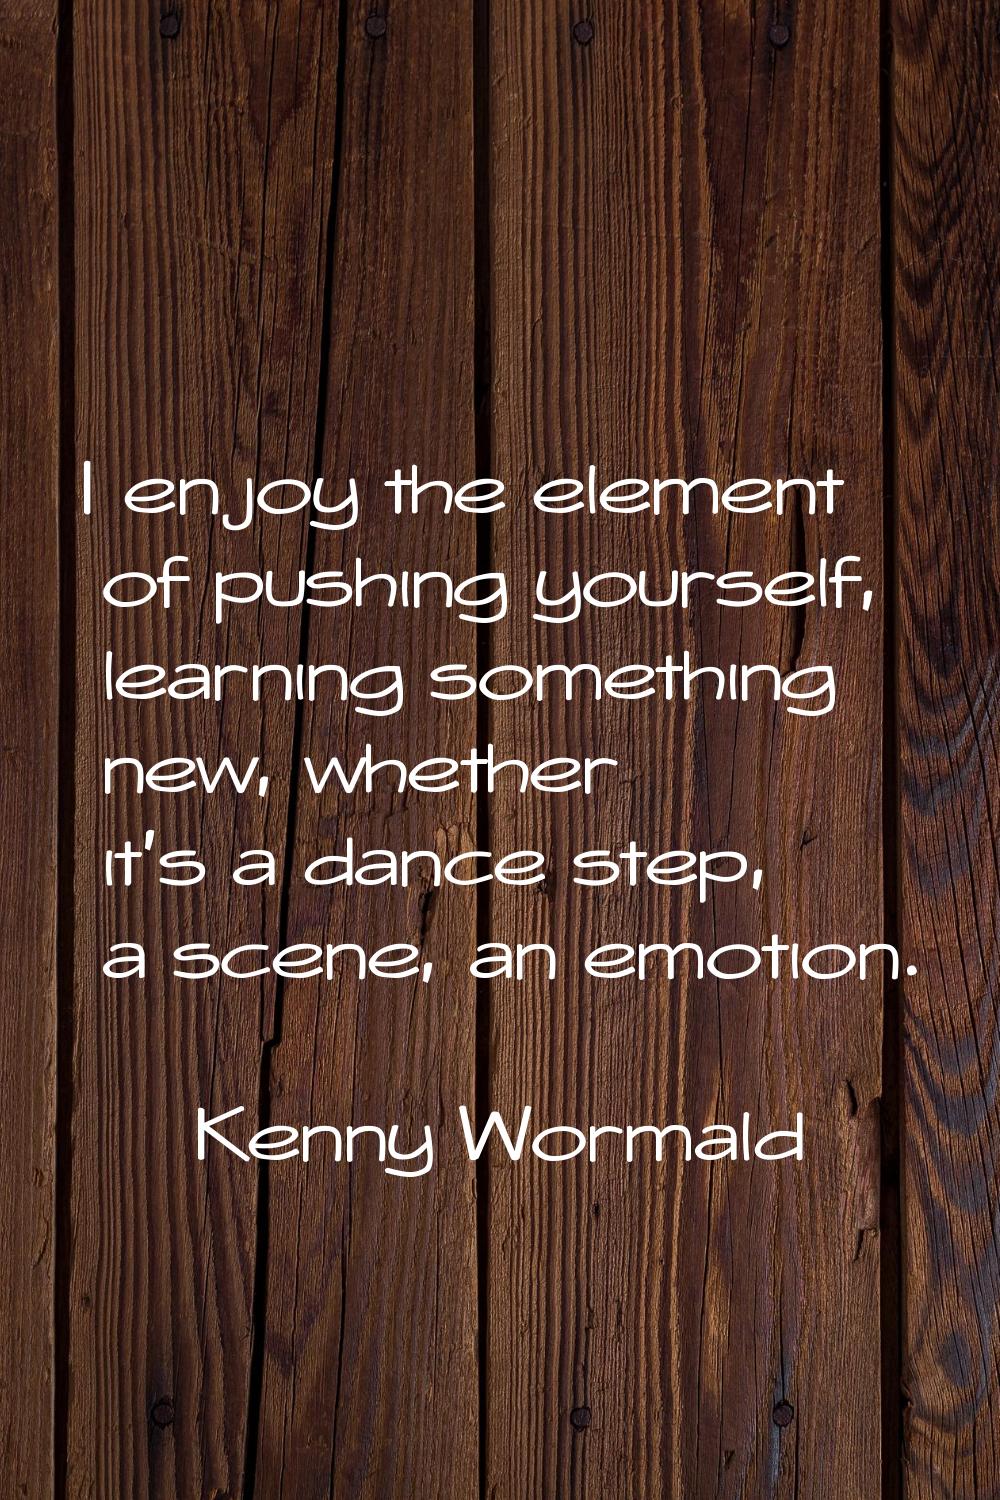 I enjoy the element of pushing yourself, learning something new, whether it's a dance step, a scene